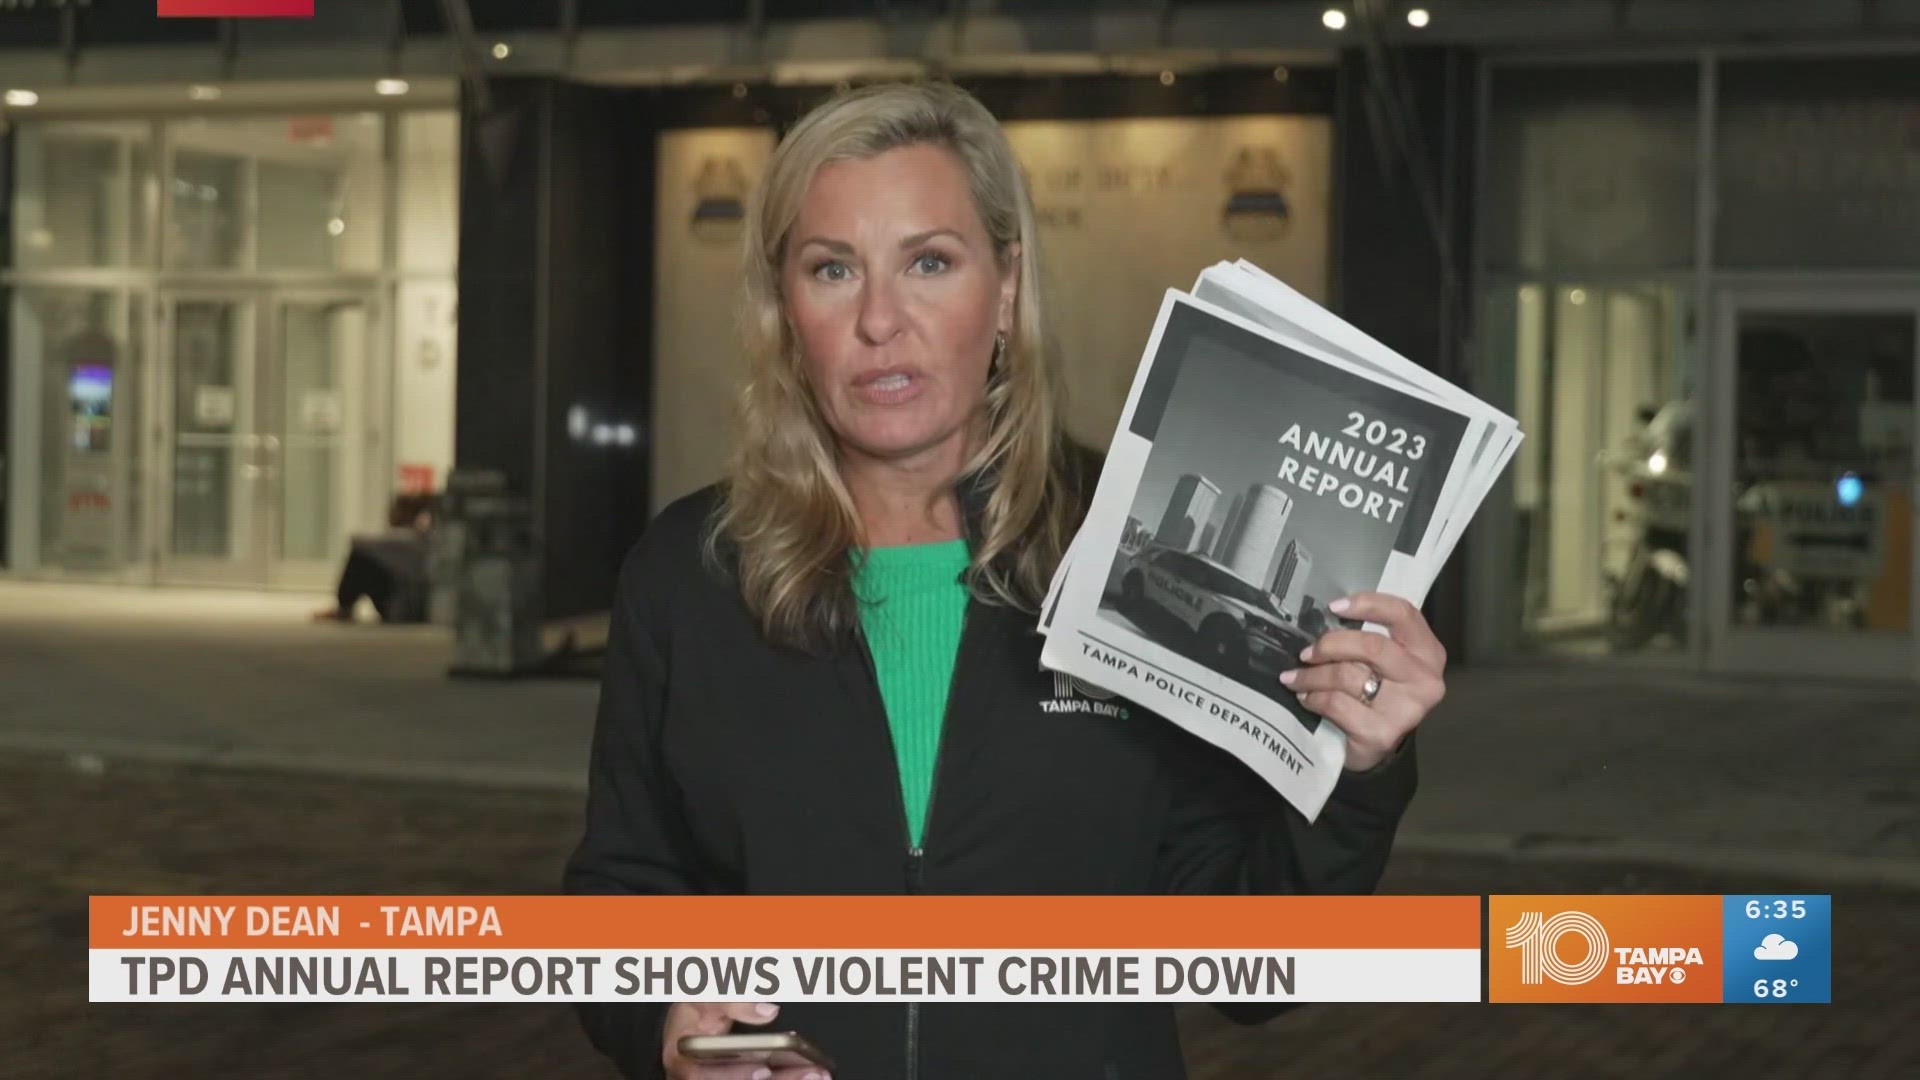 The report shows violent crime is down nearly 8.3% from the previous year. 10 Tampa Bay's Jenny Dean breaks down the report.